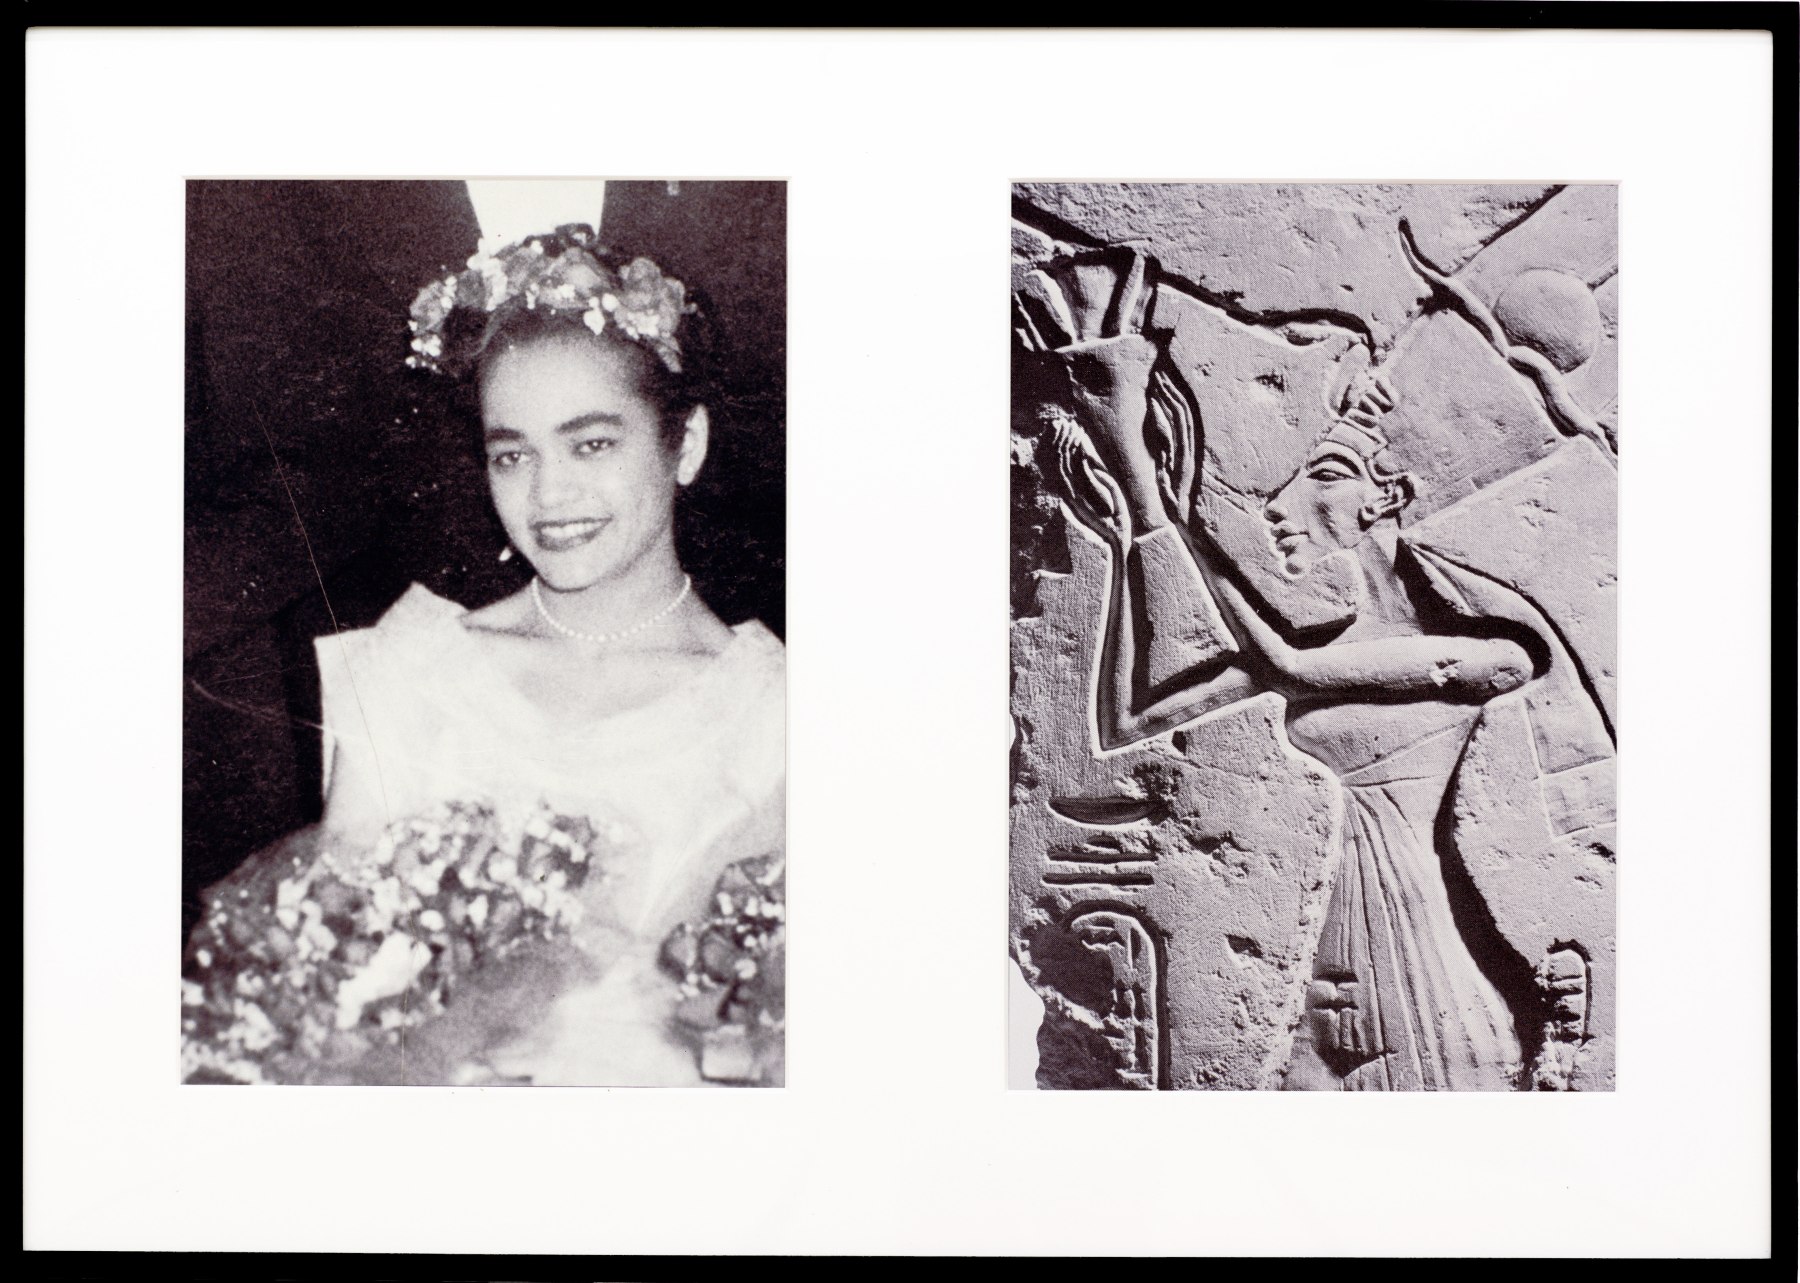 Miscegenated Family Album (Ceremonial Occasions I), L: Devonia as Matron of Honor; R: Nefertiti performing a lustration, 1980/1994, Cibachrome prints, 26h x 37w in, (66.04h x 93.98w cm)